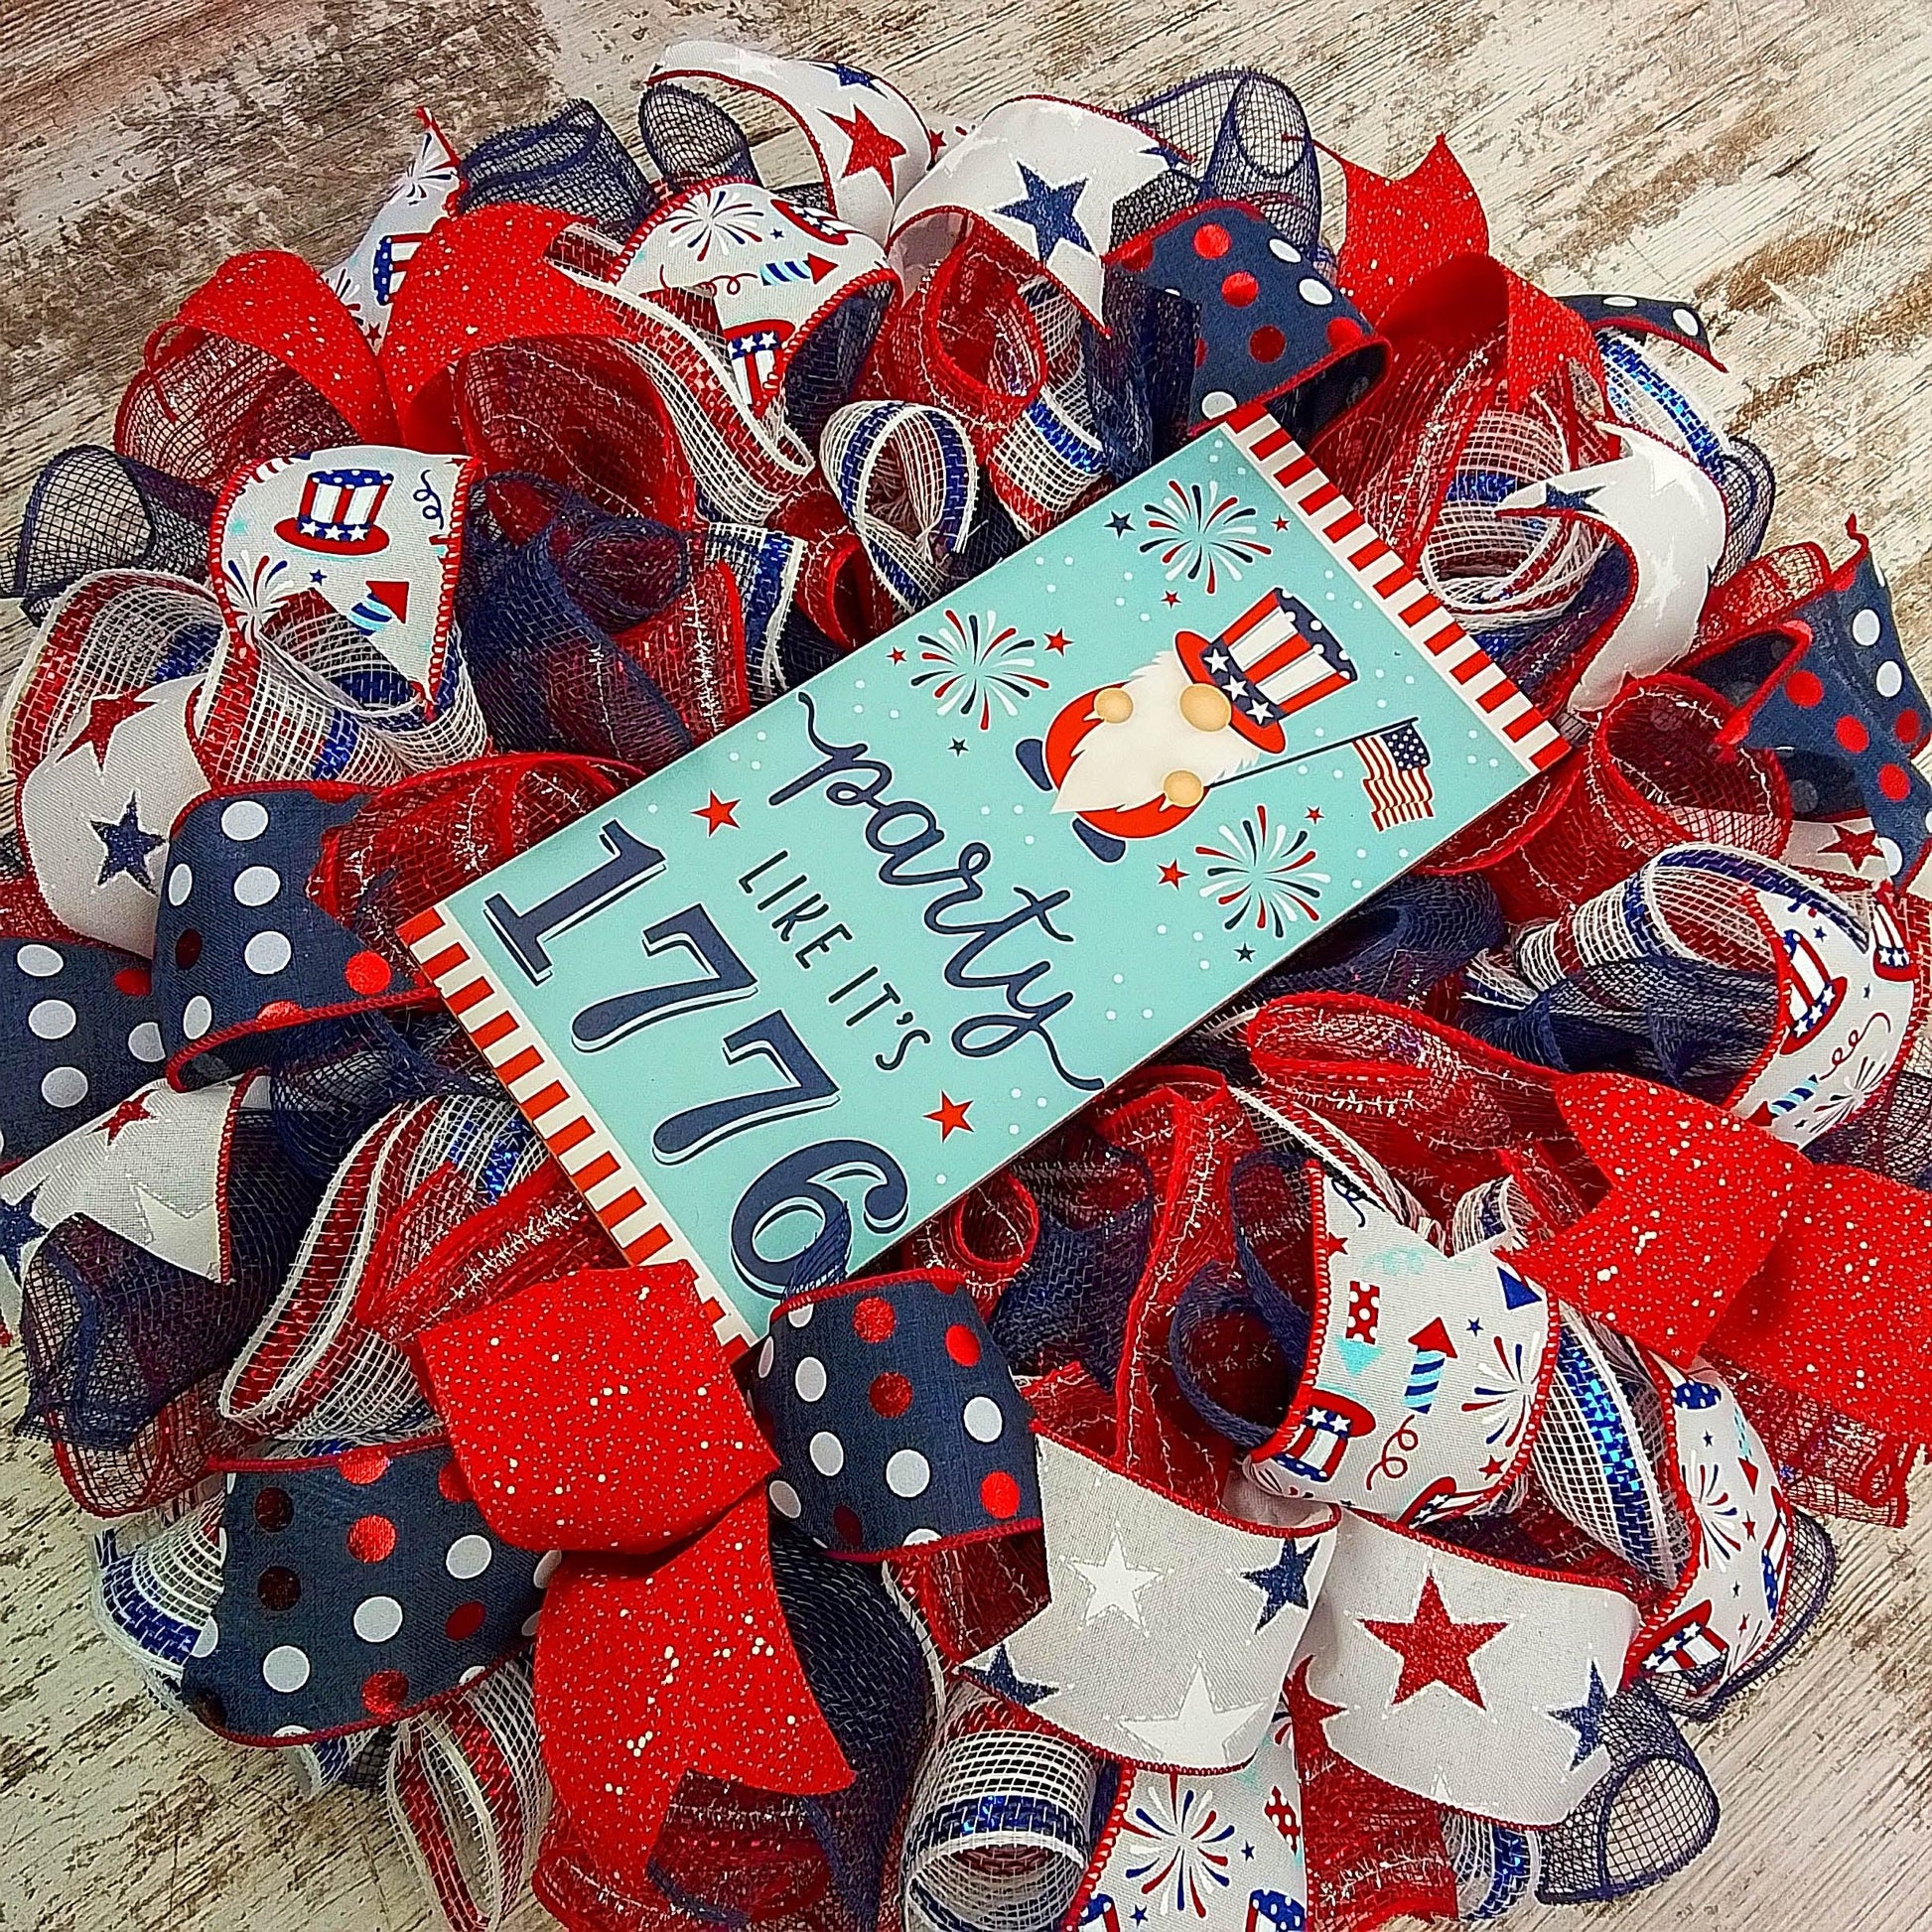 Fourth of July Wreath - USA Party Like 1776 Family Decor - Patriotic Red White Navy Blue Flag Decoration - Pink Door Wreaths